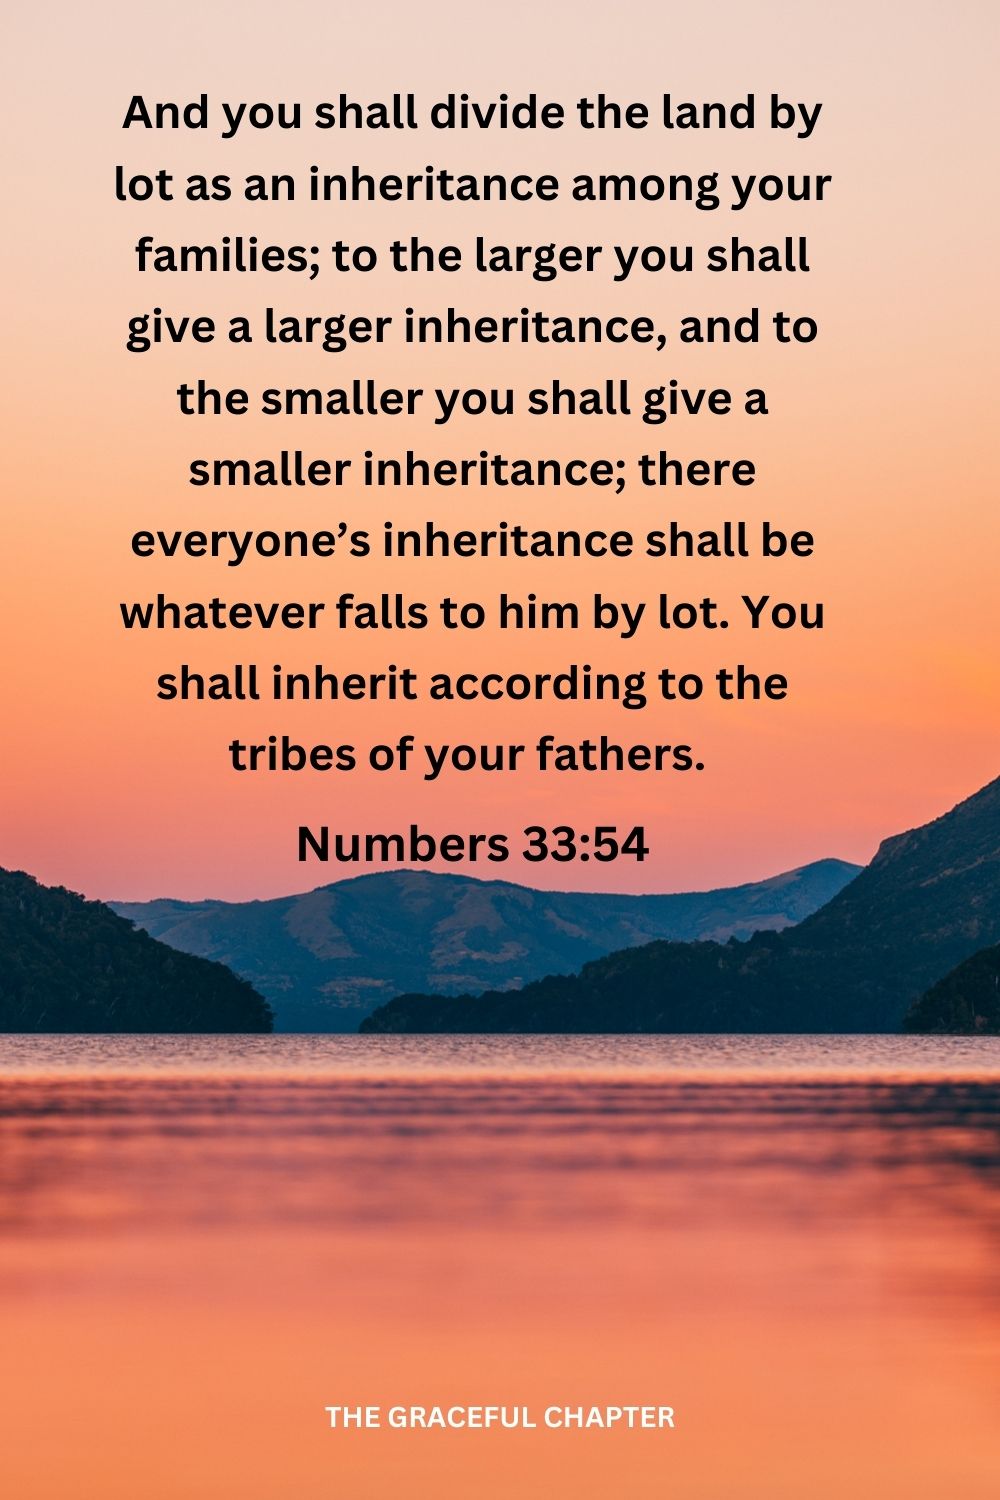 And you shall divide the land by lot as an inheritance among your families; to the larger you shall give a larger inheritance, and to the smaller you shall give a smaller inheritance; there everyone’s inheritance shall be whatever falls to him by lot. You shall inherit according to the tribes of your fathers. Numbers 33:54